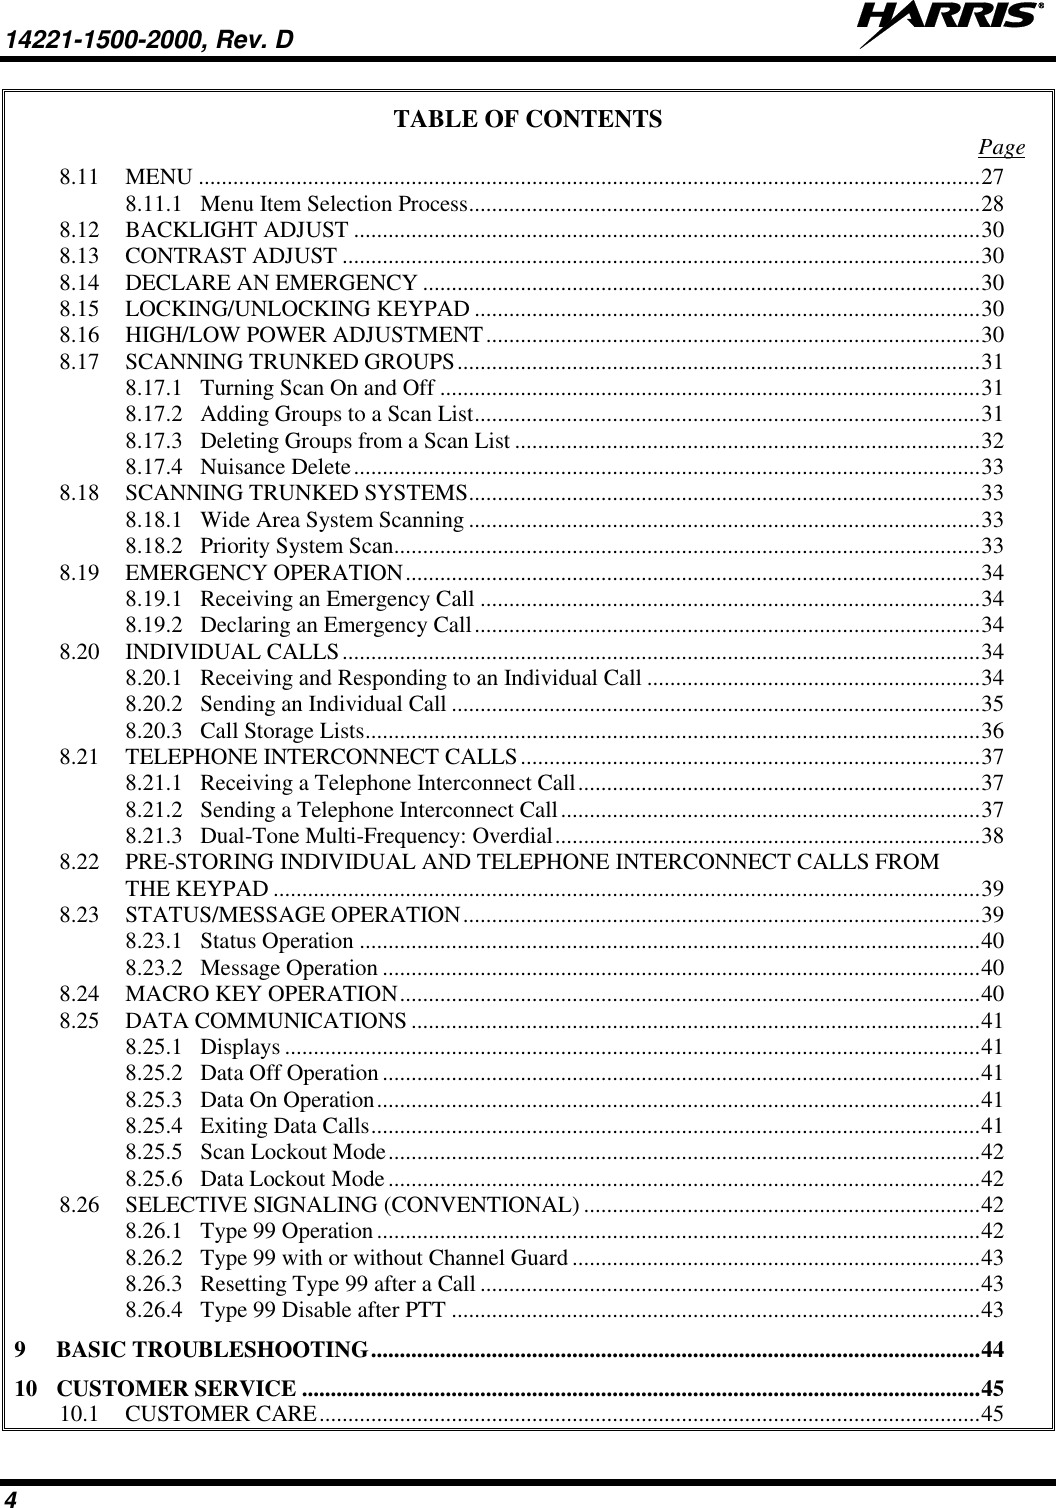 14221-1500-2000, Rev. D   4 TABLE OF CONTENTS  Page 8.11 MENU ........................................................................................................................................ 27 8.11.1 Menu Item Selection Process ......................................................................................... 28 8.12 BACKLIGHT ADJUST ............................................................................................................. 30 8.13 CONTRAST ADJUST ............................................................................................................... 30 8.14 DECLARE AN EMERGENCY ................................................................................................. 30 8.15 LOCKING/UNLOCKING KEYPAD ........................................................................................ 30 8.16 HIGH/LOW POWER ADJUSTMENT ...................................................................................... 30 8.17 SCANNING TRUNKED GROUPS ........................................................................................... 31 8.17.1 Turning Scan On and Off .............................................................................................. 31 8.17.2 Adding Groups to a Scan List ........................................................................................ 31 8.17.3 Deleting Groups from a Scan List ................................................................................. 32 8.17.4 Nuisance Delete ............................................................................................................. 33 8.18 SCANNING TRUNKED SYSTEMS ......................................................................................... 33 8.18.1 Wide Area System Scanning ......................................................................................... 33 8.18.2 Priority System Scan...................................................................................................... 33 8.19 EMERGENCY OPERATION .................................................................................................... 34 8.19.1 Receiving an Emergency Call ....................................................................................... 34 8.19.2 Declaring an Emergency Call ........................................................................................ 34 8.20 INDIVIDUAL CALLS ............................................................................................................... 34 8.20.1 Receiving and Responding to an Individual Call .......................................................... 34 8.20.2 Sending an Individual Call ............................................................................................ 35 8.20.3 Call Storage Lists ........................................................................................................... 36 8.21 TELEPHONE INTERCONNECT CALLS ................................................................................ 37 8.21.1 Receiving a Telephone Interconnect Call ...................................................................... 37 8.21.2 Sending a Telephone Interconnect Call ......................................................................... 37 8.21.3 Dual-Tone Multi-Frequency: Overdial .......................................................................... 38 8.22 PRE-STORING INDIVIDUAL AND TELEPHONE INTERCONNECT CALLS FROM THE KEYPAD ........................................................................................................................... 39 8.23 STATUS/MESSAGE OPERATION .......................................................................................... 39 8.23.1 Status Operation ............................................................................................................ 40 8.23.2 Message Operation ........................................................................................................ 40 8.24 MACRO KEY OPERATION ..................................................................................................... 40 8.25 DATA COMMUNICATIONS ................................................................................................... 41 8.25.1 Displays ......................................................................................................................... 41 8.25.2 Data Off Operation ........................................................................................................ 41 8.25.3 Data On Operation ......................................................................................................... 41 8.25.4 Exiting Data Calls .......................................................................................................... 41 8.25.5 Scan Lockout Mode ....................................................................................................... 42 8.25.6 Data Lockout Mode ....................................................................................................... 42 8.26 SELECTIVE SIGNALING (CONVENTIONAL) ..................................................................... 42 8.26.1 Type 99 Operation ......................................................................................................... 42 8.26.2 Type 99 with or without Channel Guard ....................................................................... 43 8.26.3 Resetting Type 99 after a Call ....................................................................................... 43 8.26.4 Type 99 Disable after PTT ............................................................................................ 43 9 BASIC TROUBLESHOOTING .......................................................................................................... 44 10 CUSTOMER SERVICE ...................................................................................................................... 45 10.1 CUSTOMER CARE ................................................................................................................... 45 